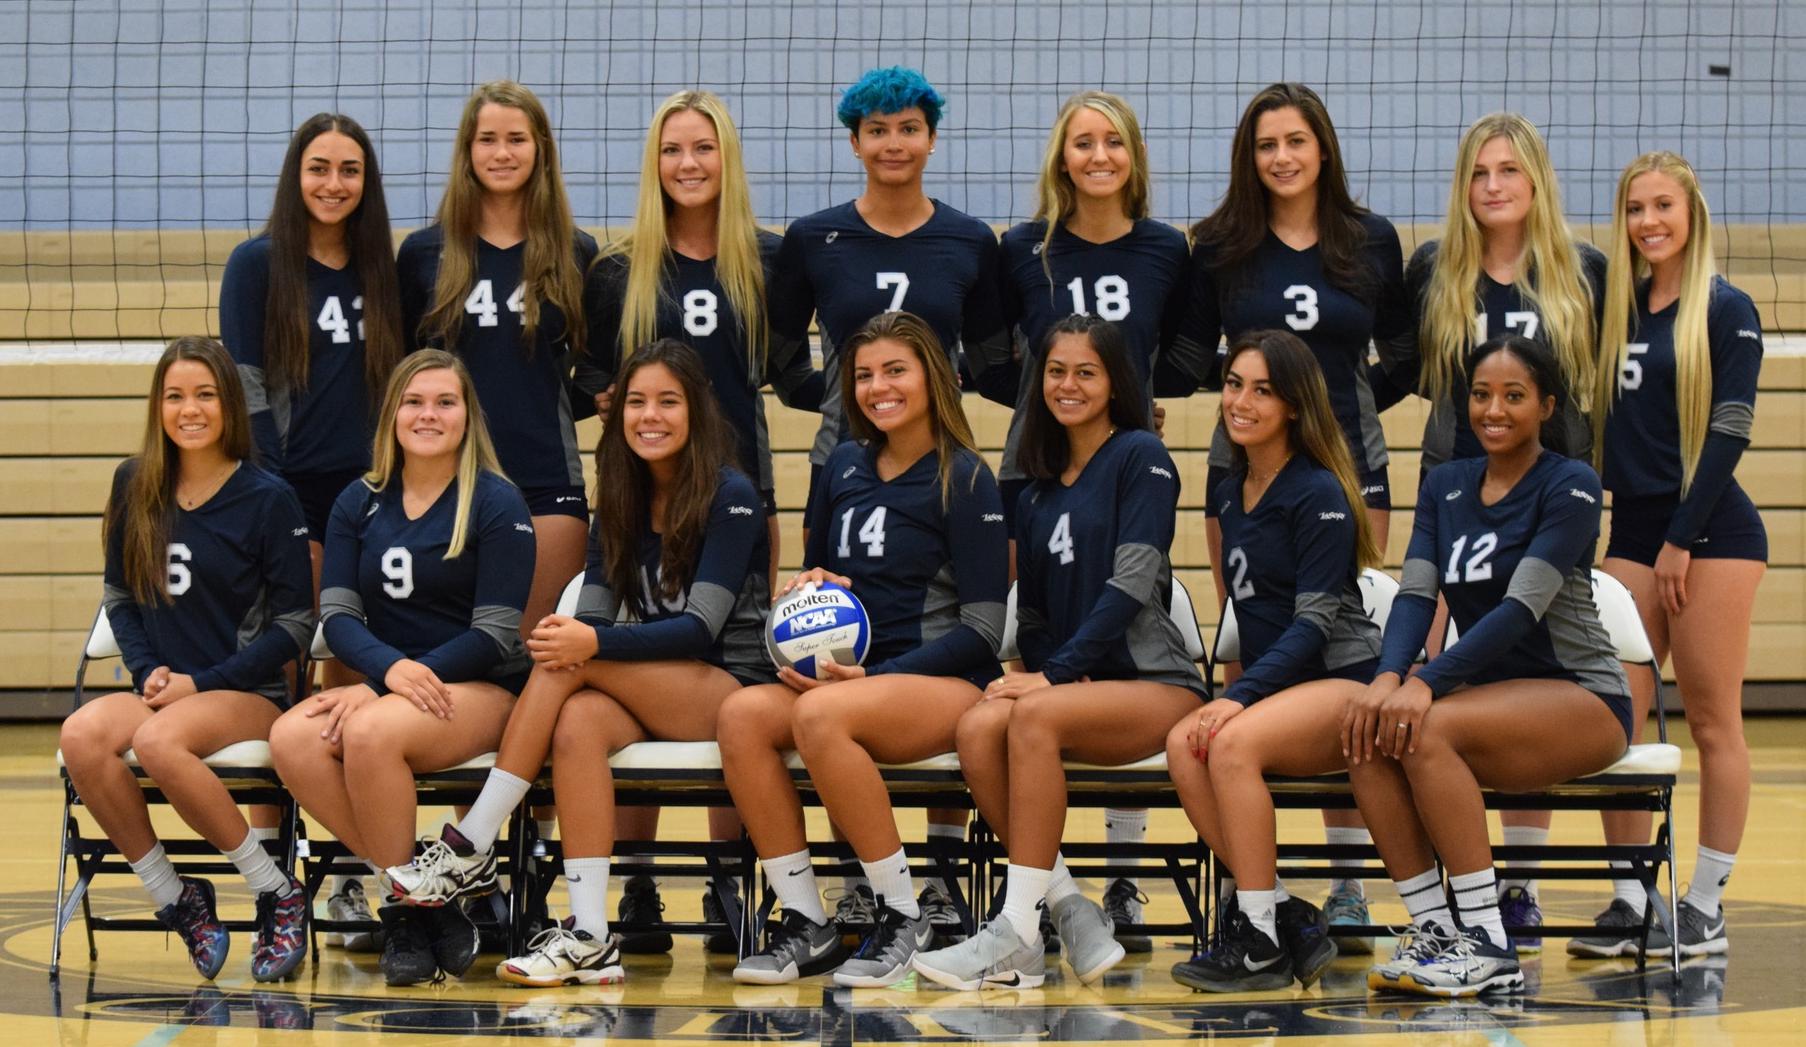 Women's volleyball team No. 2 in state in first poll of 2017